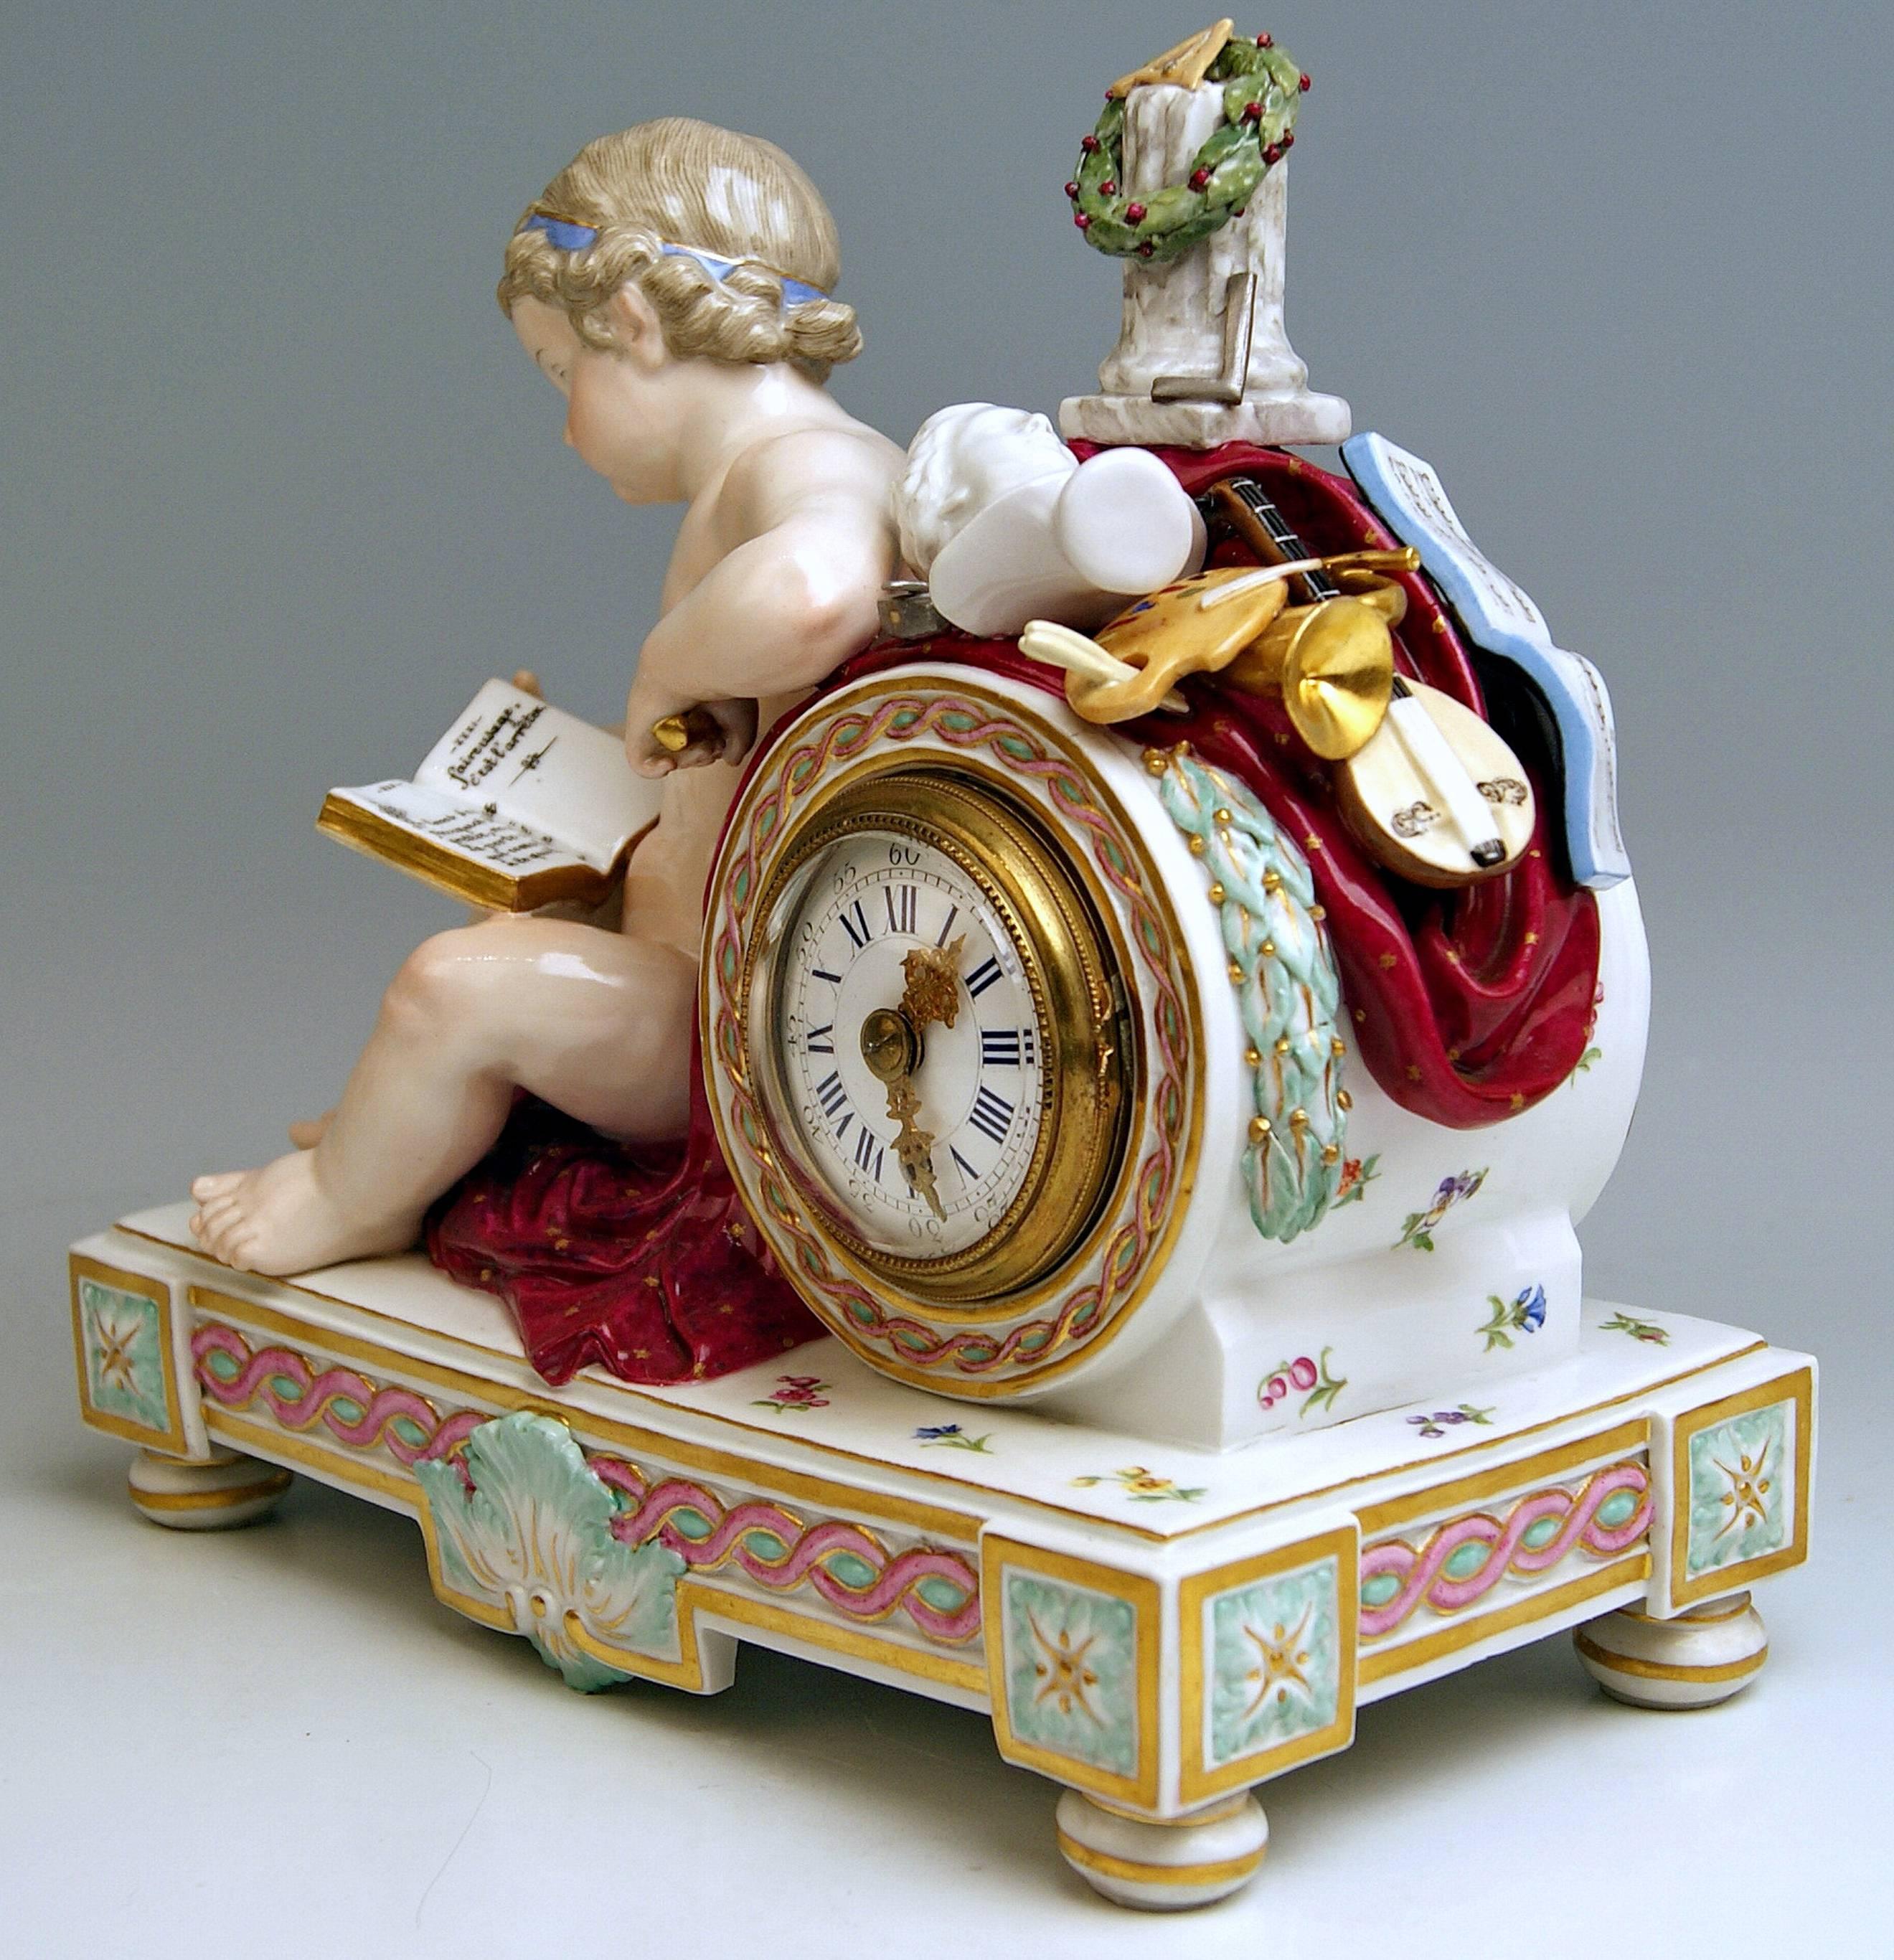 Meissen Gorgeous Mantel / Table Clock, abundantly decorated with Sculptured Figurine (= Cherub)  and  Symbols of Fine Arts.

Manufactory: Meissen
Hallmarked:  Blue Meissen Sword Mark with Pommels on Hilts
Model Number D 78
Former's Number 88 /